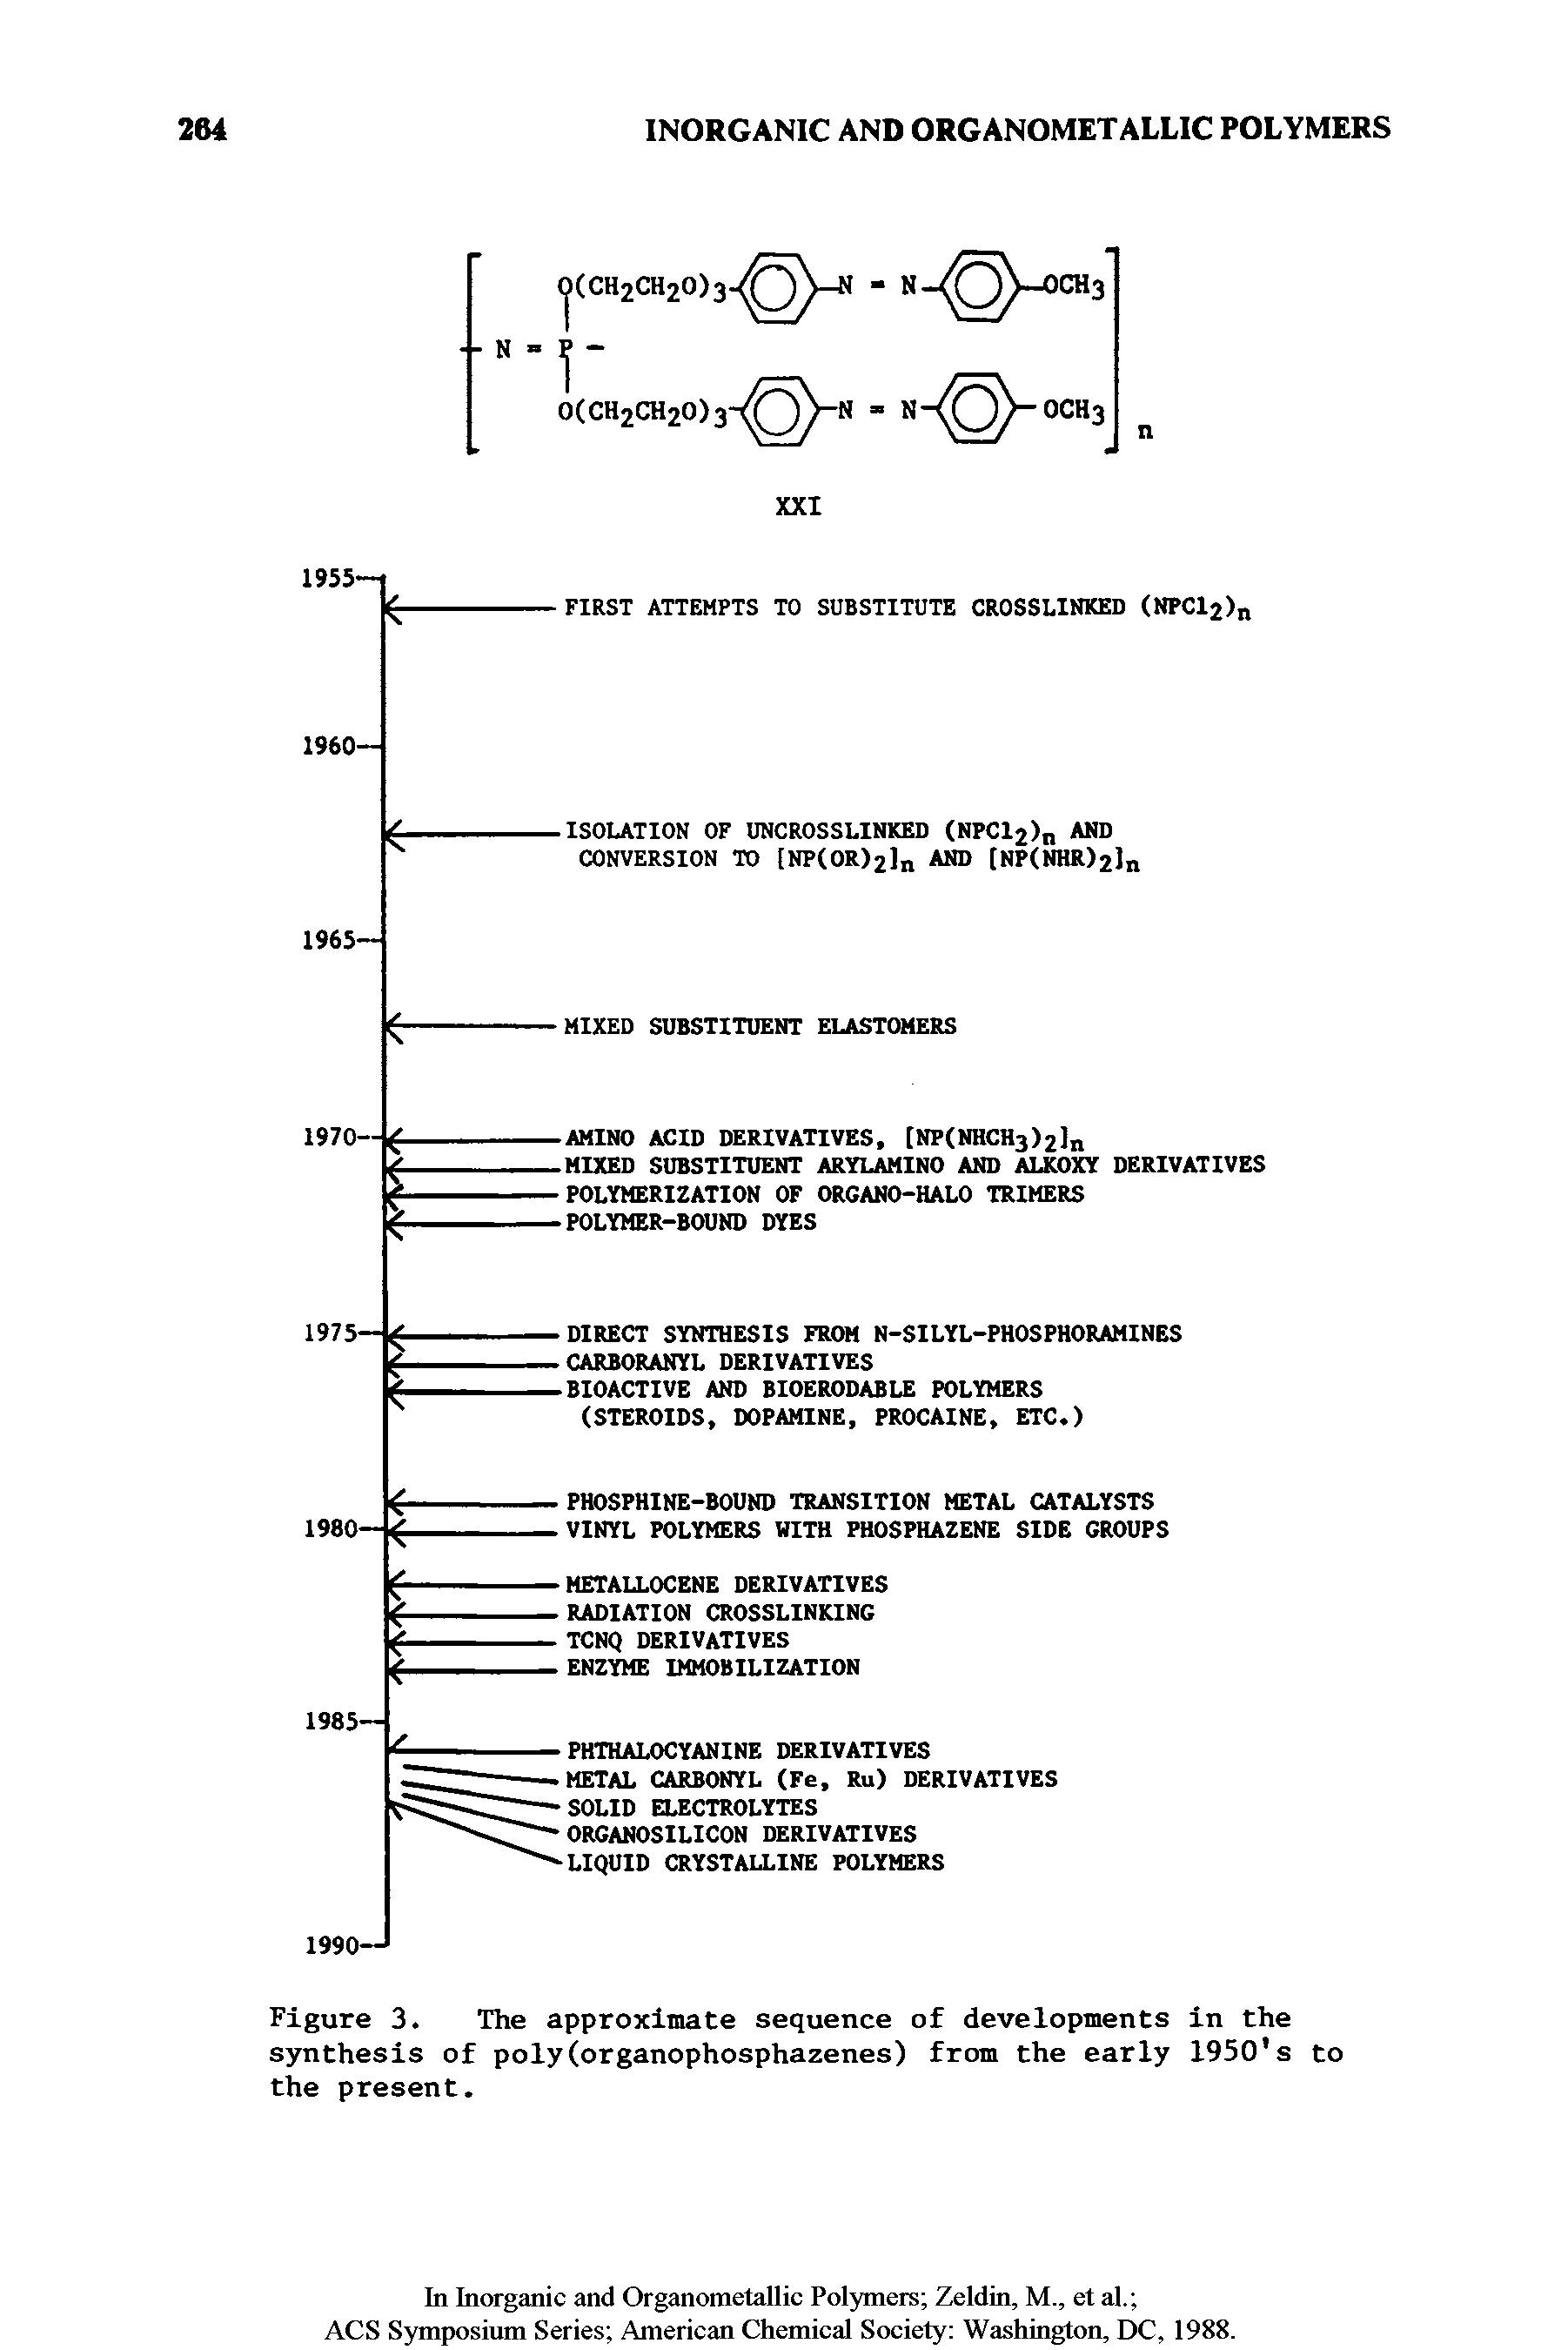 Figure 3. The approximate sequence of developments in the synthesis of poly(organophosphazenes) from the early 1950 s to the present.